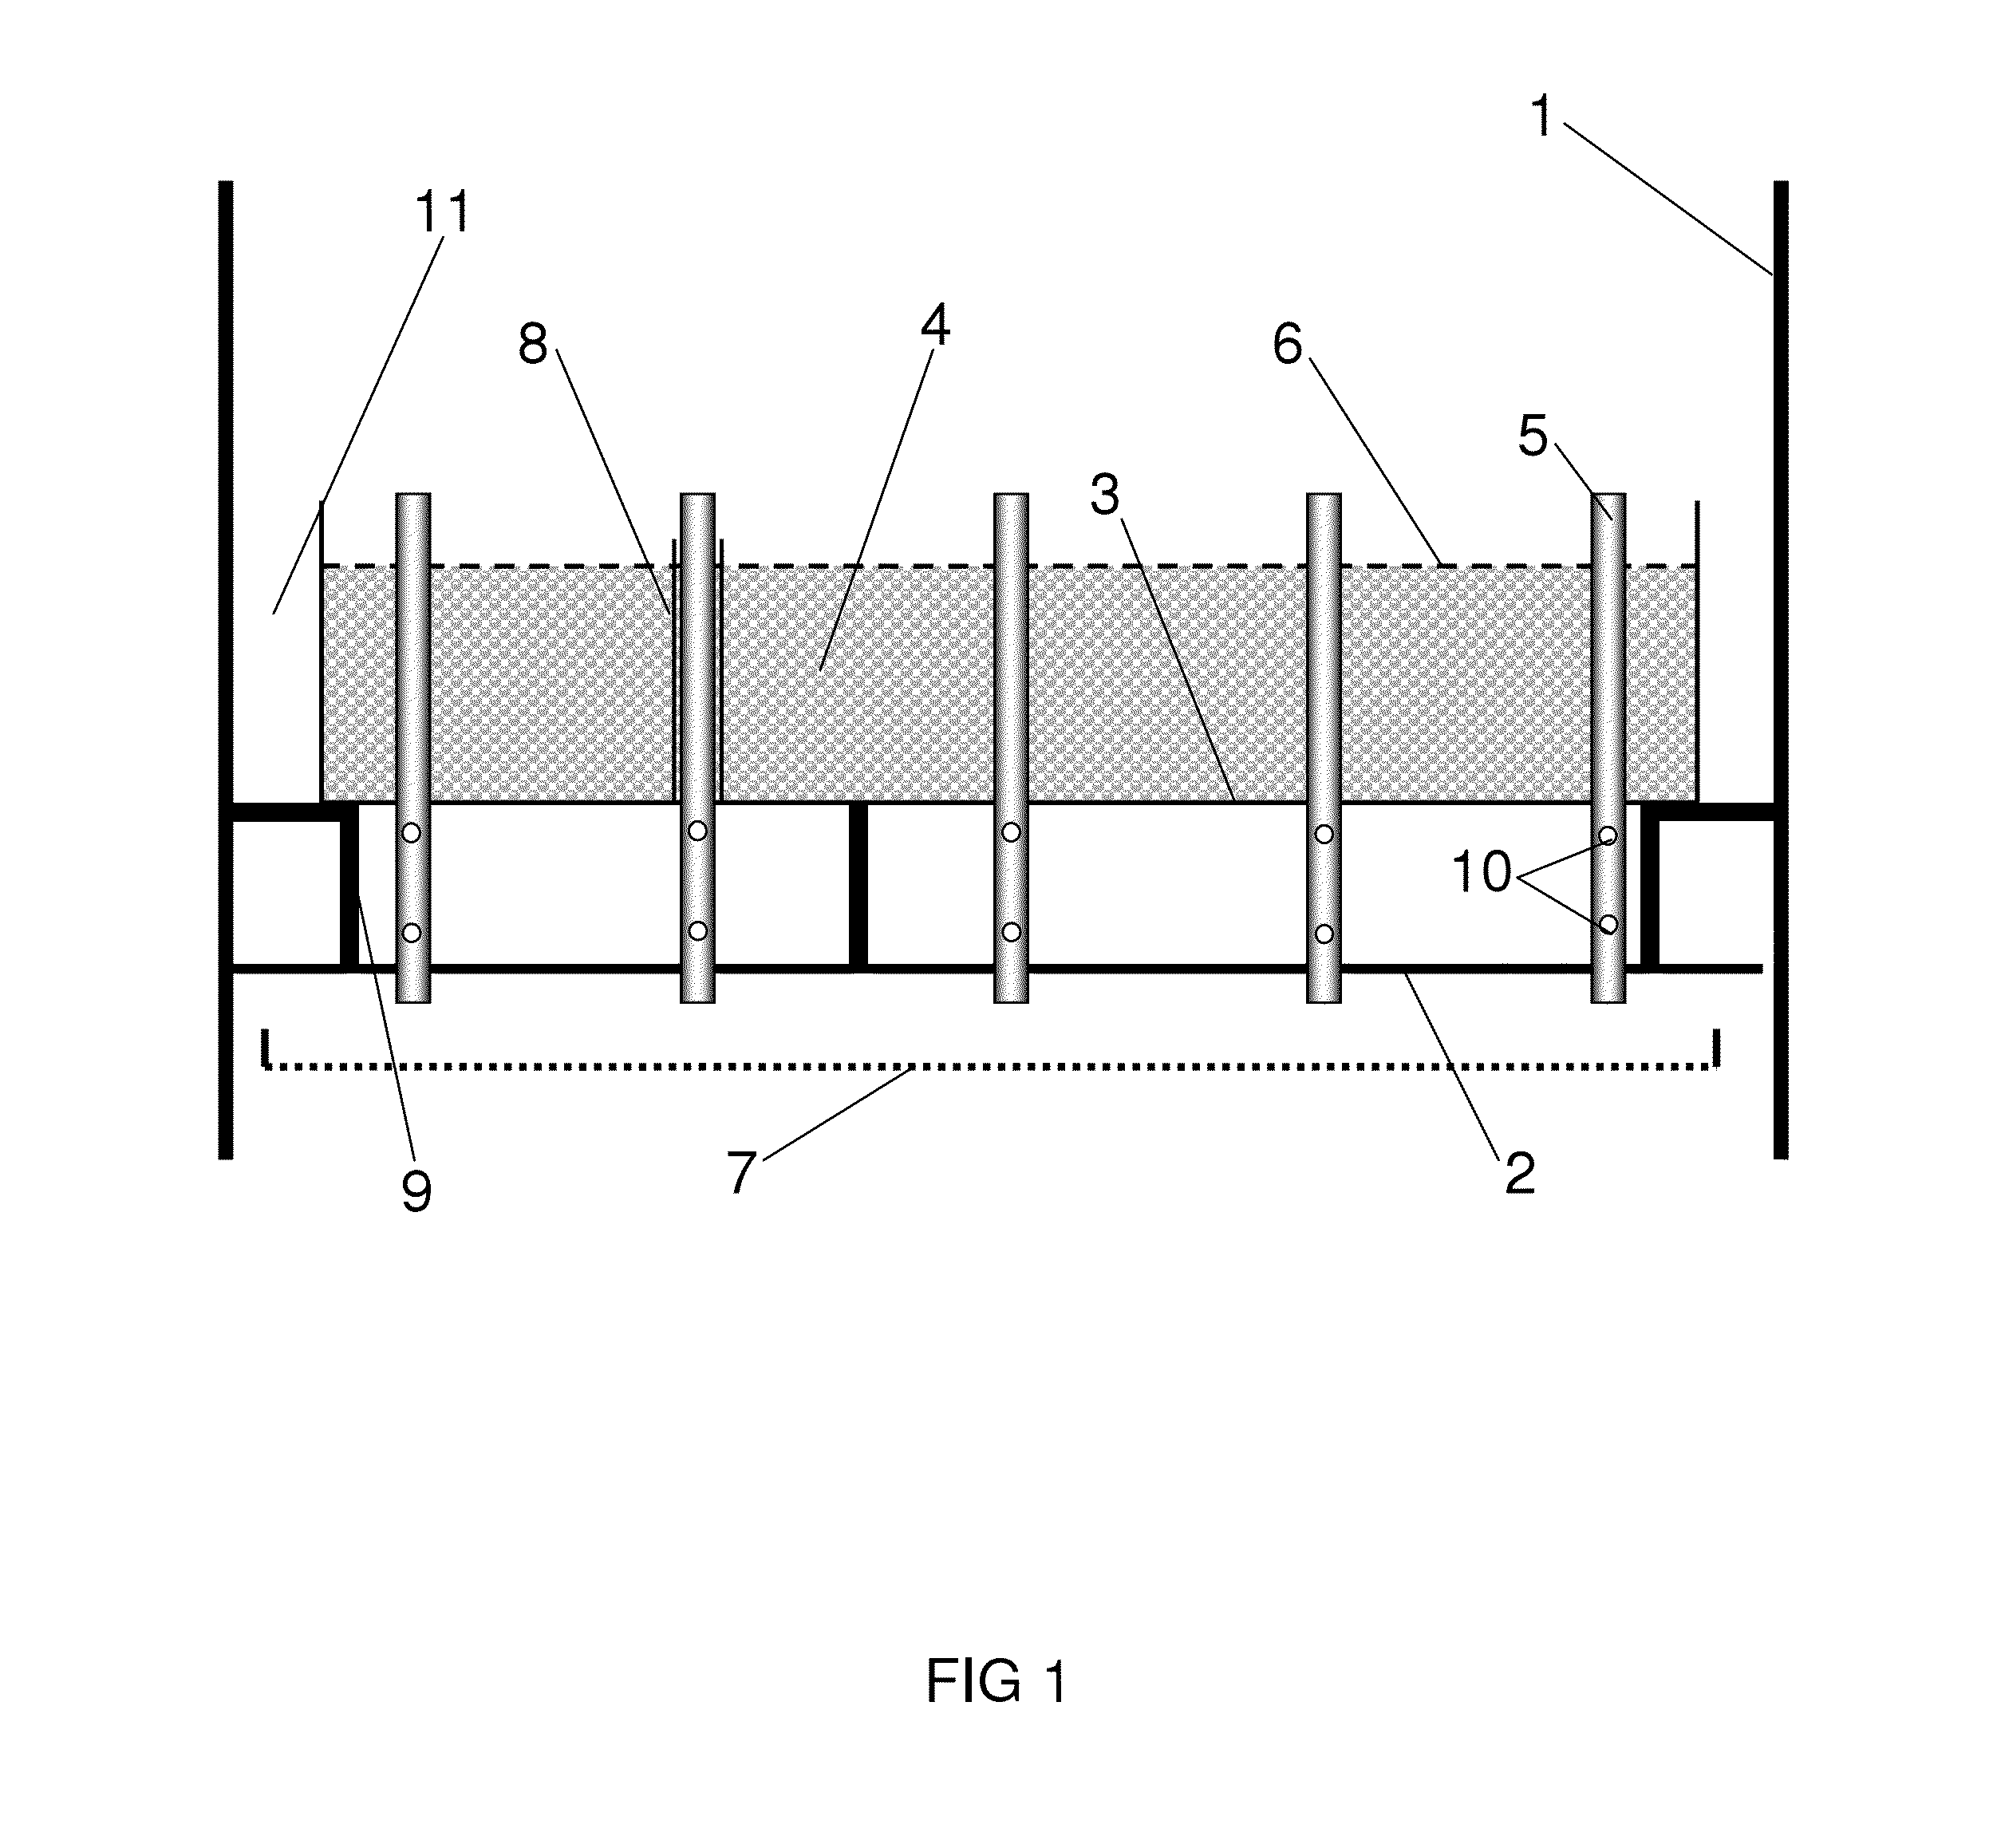 Filtering distributor plate for supplying a fixed bed reactor having a co-current downflow of gas and liquid for the treatment of heavy clogging feeds